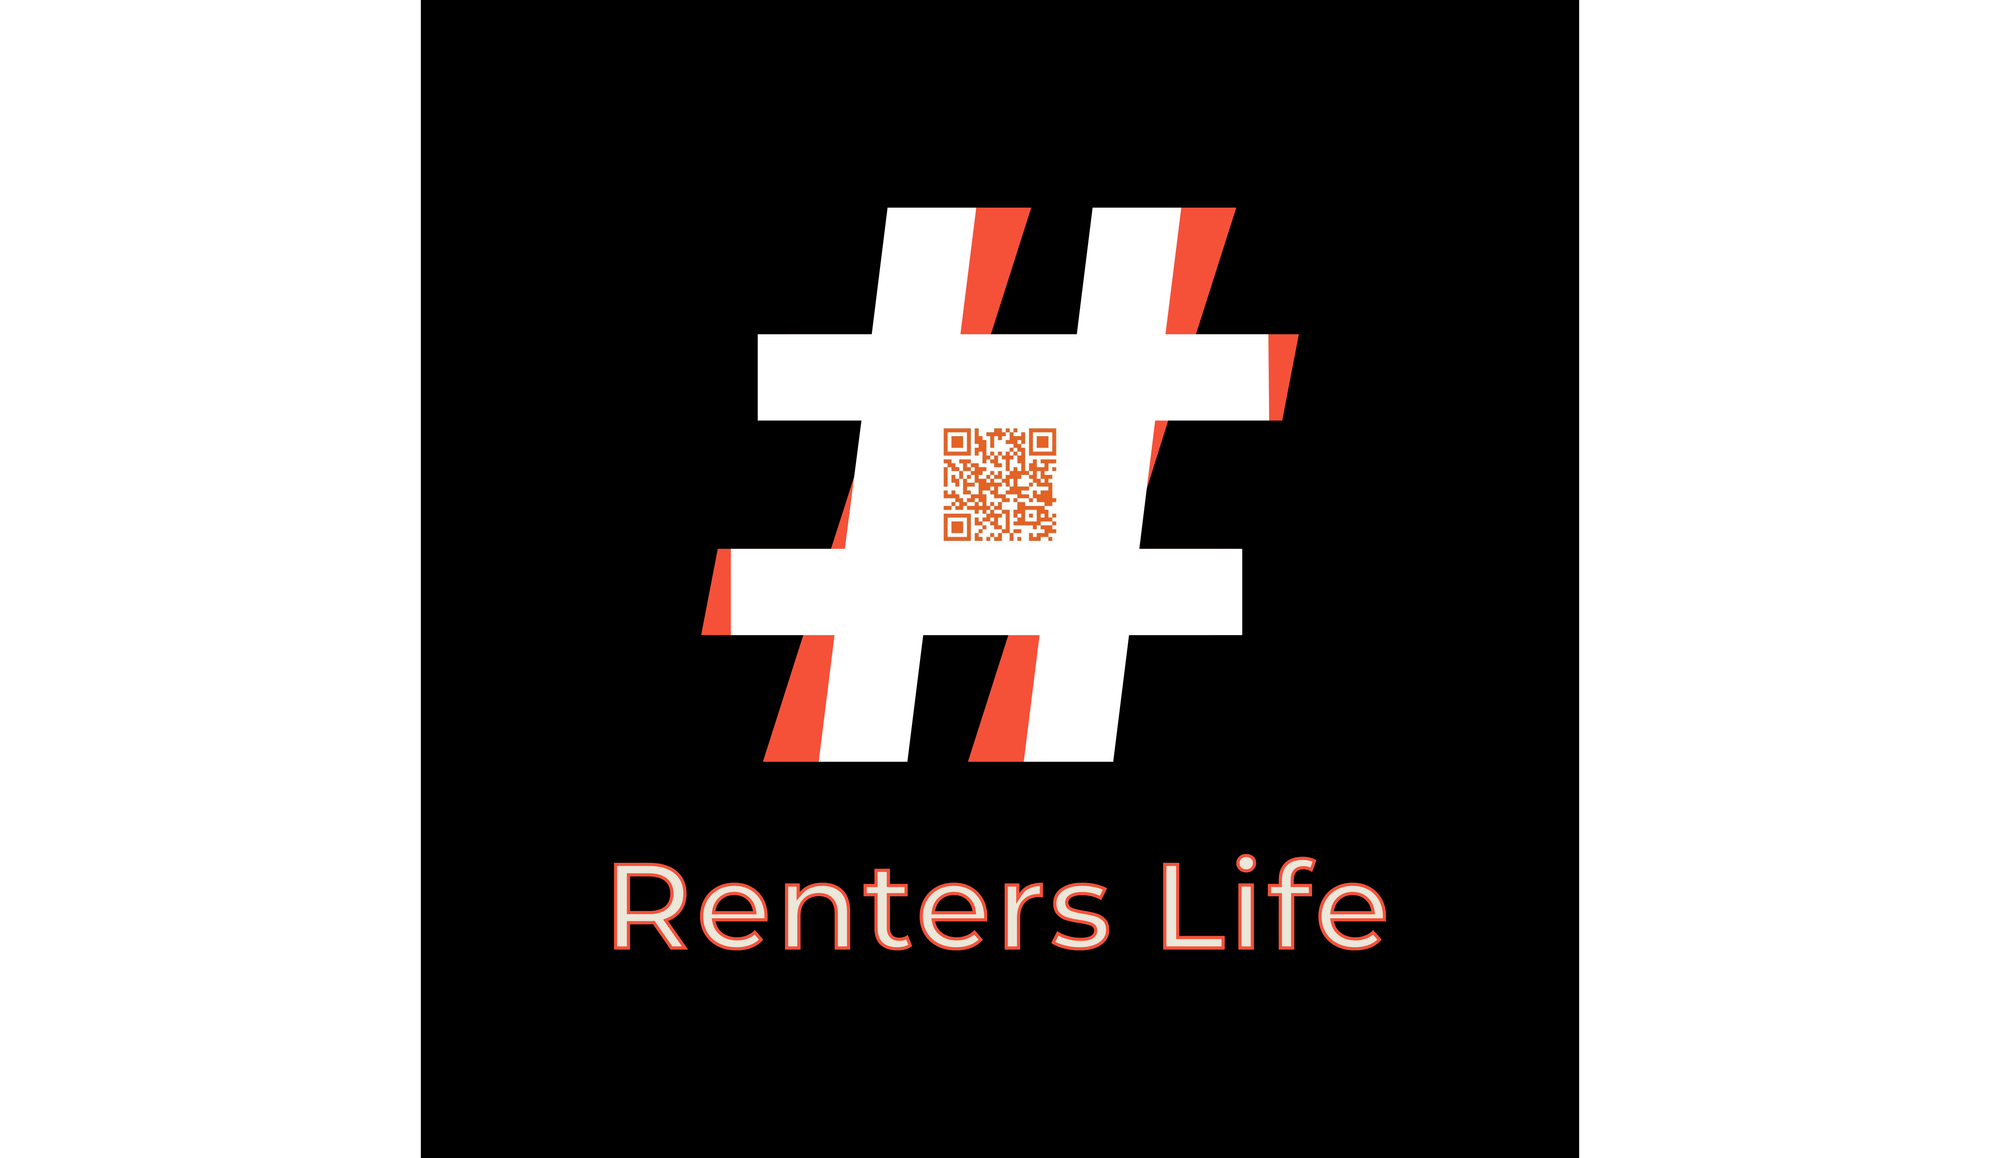 Renting Within Reach - Hashtag Renters Life